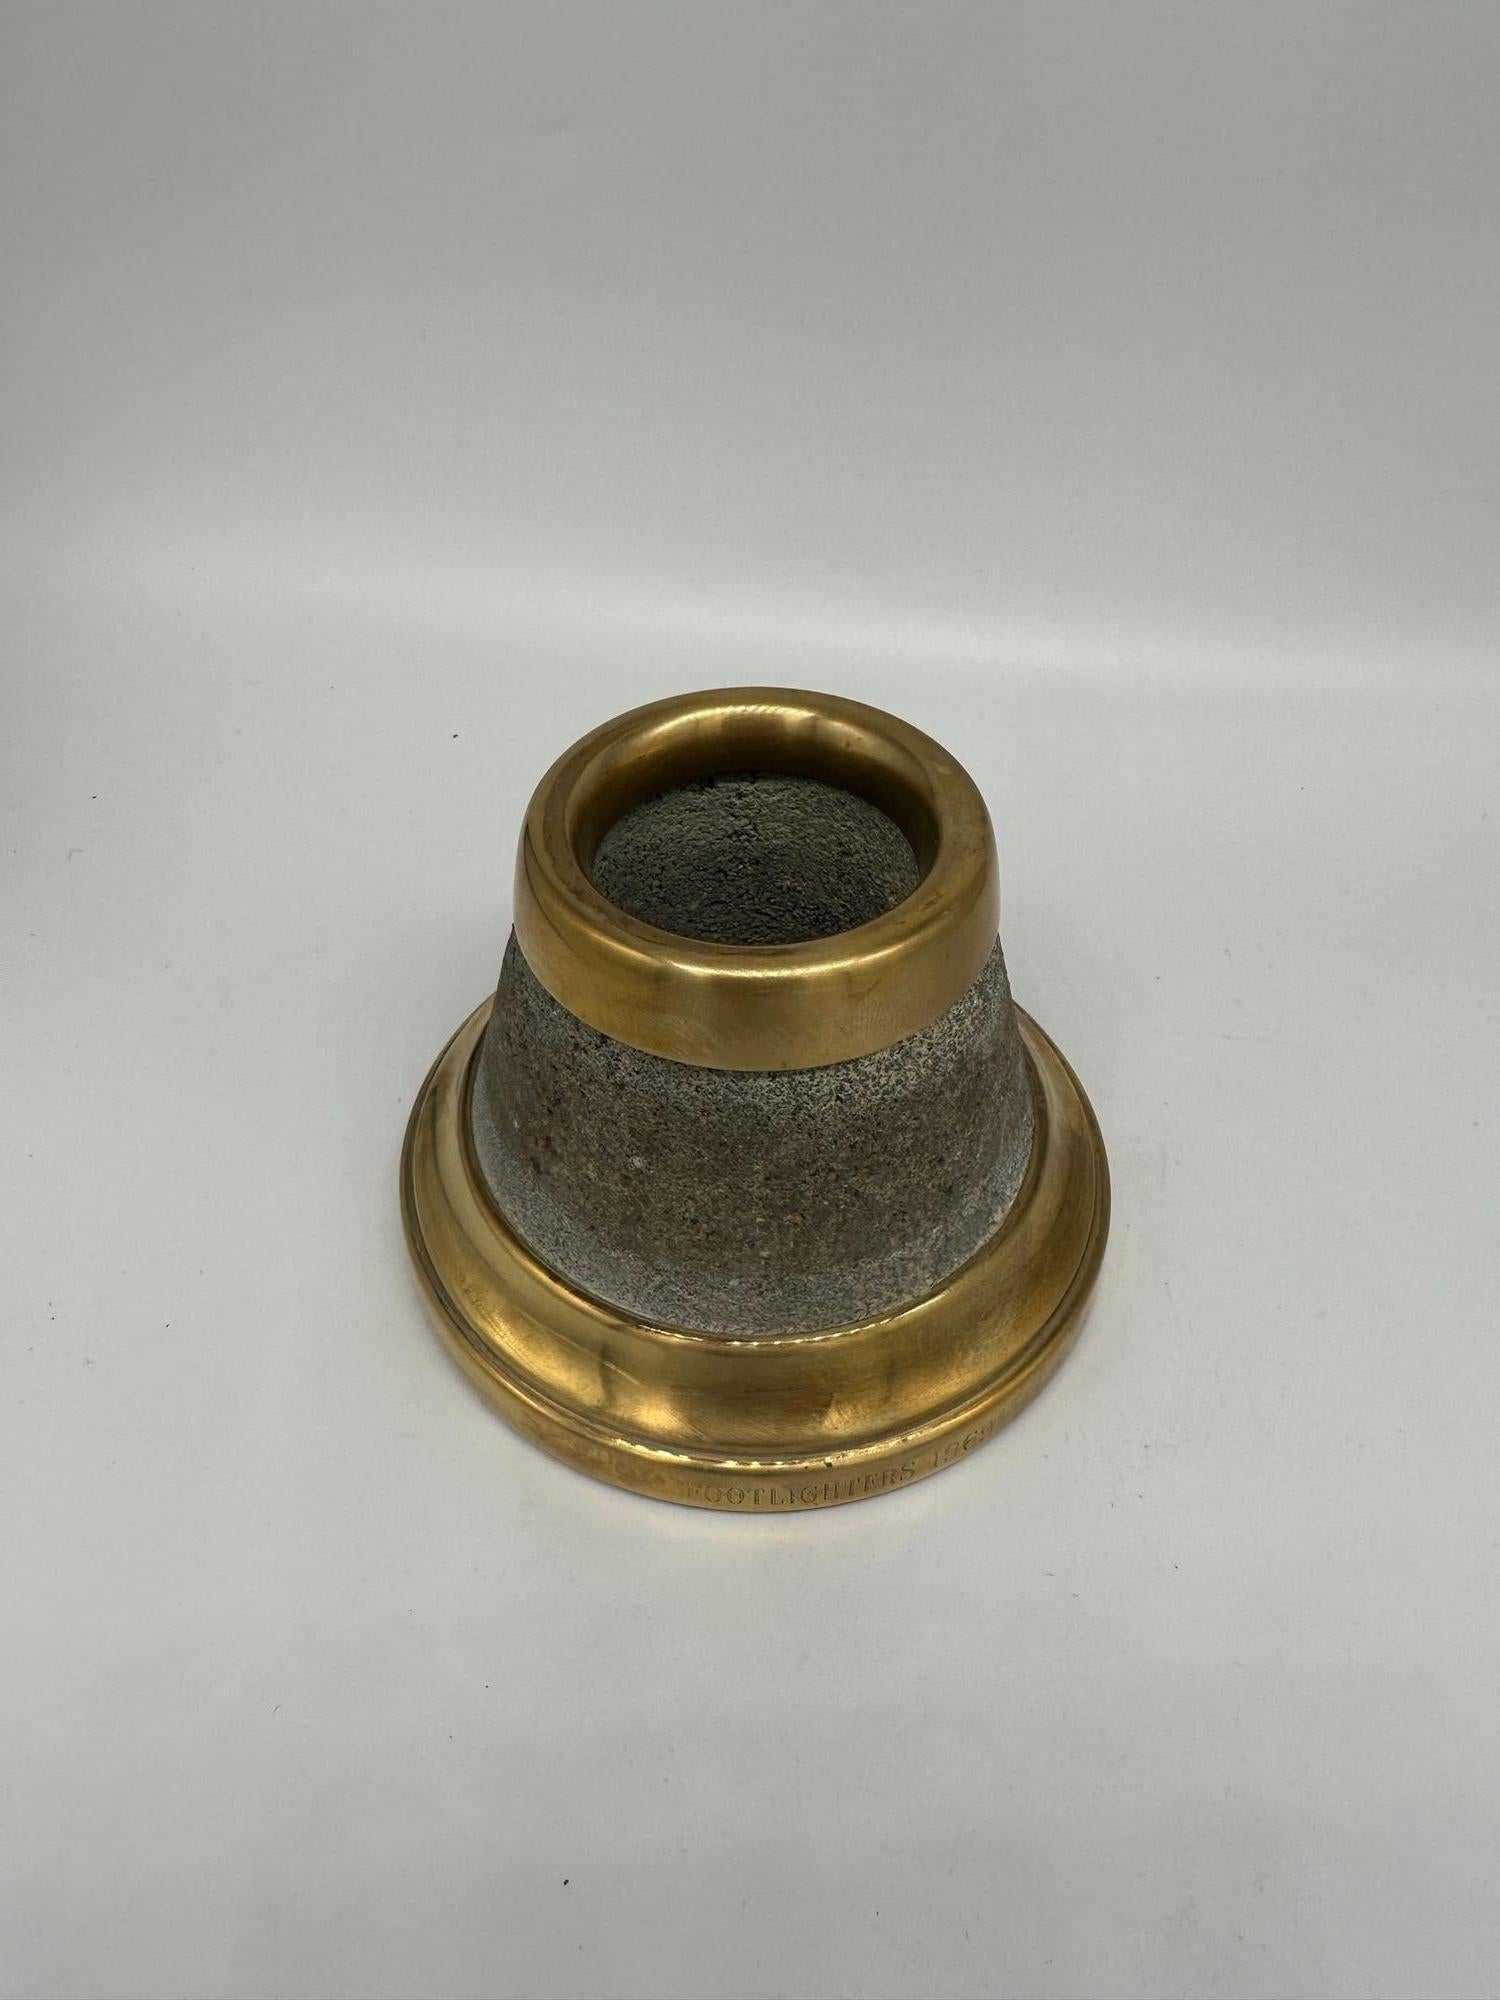 North American 1960's Stone and Brass Match Holder and Striker signed 